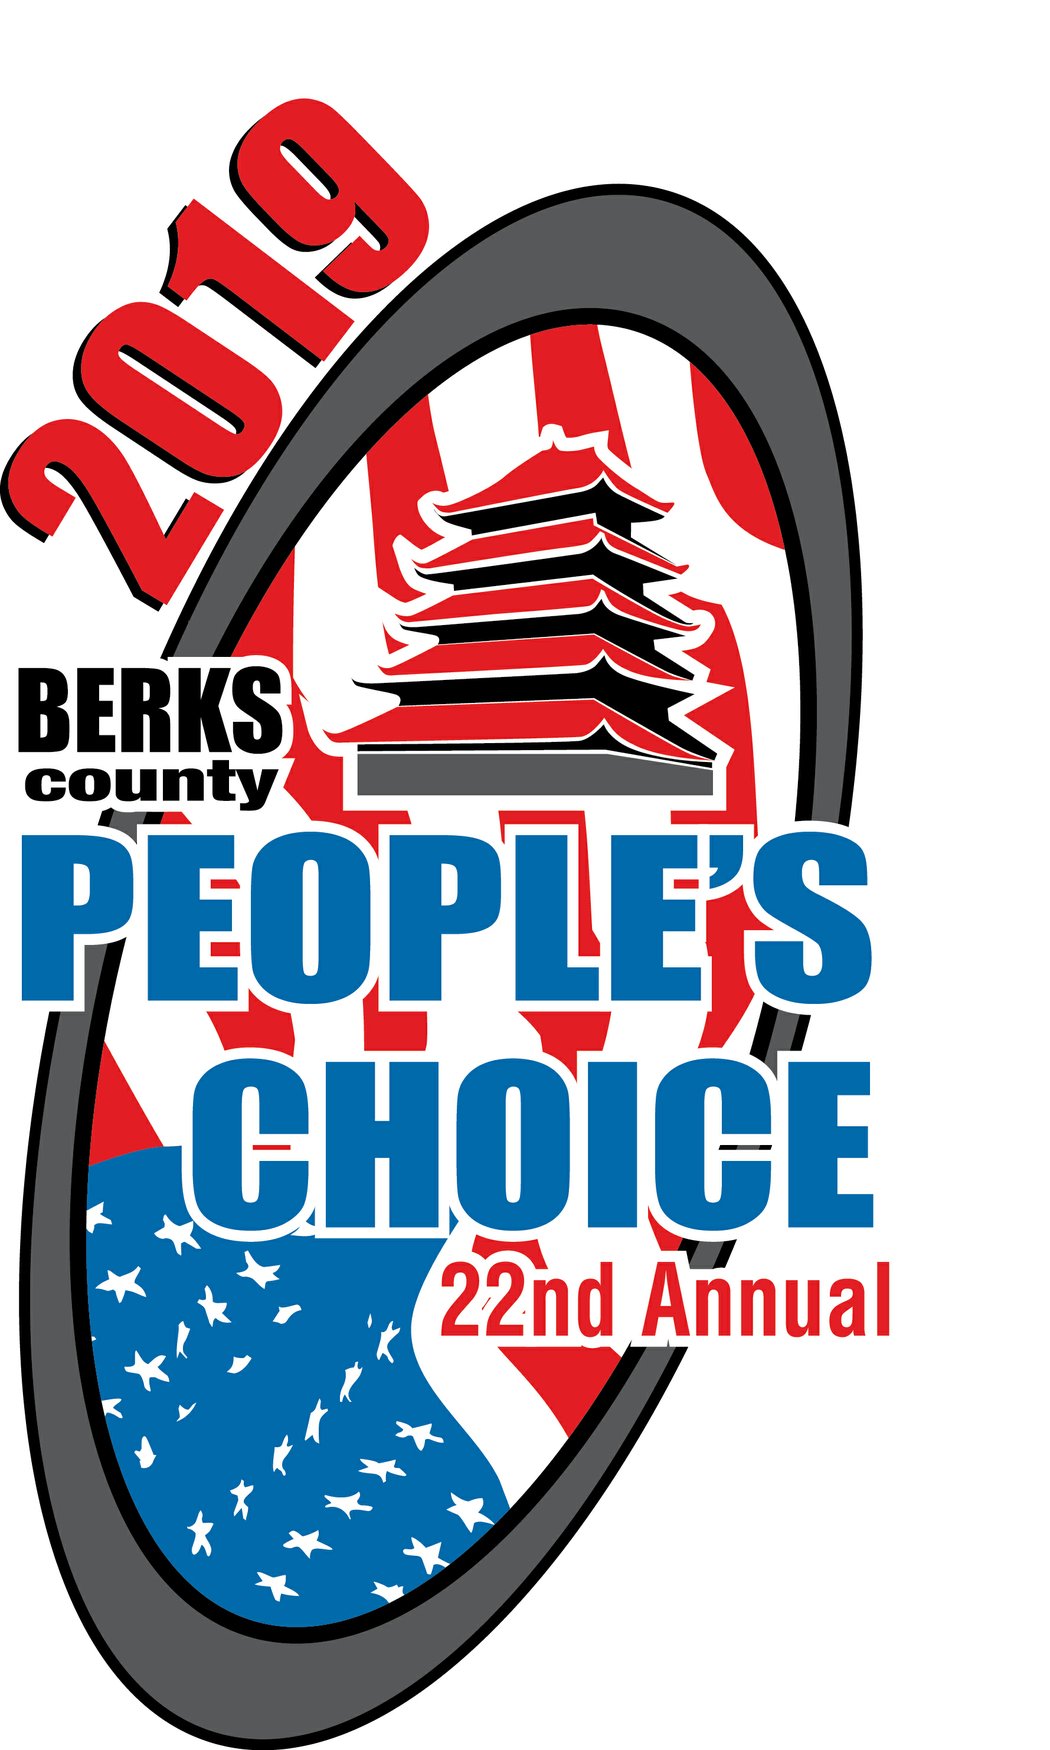 Bachman’s Roofing Accepts Prestigious People’s Choice Award